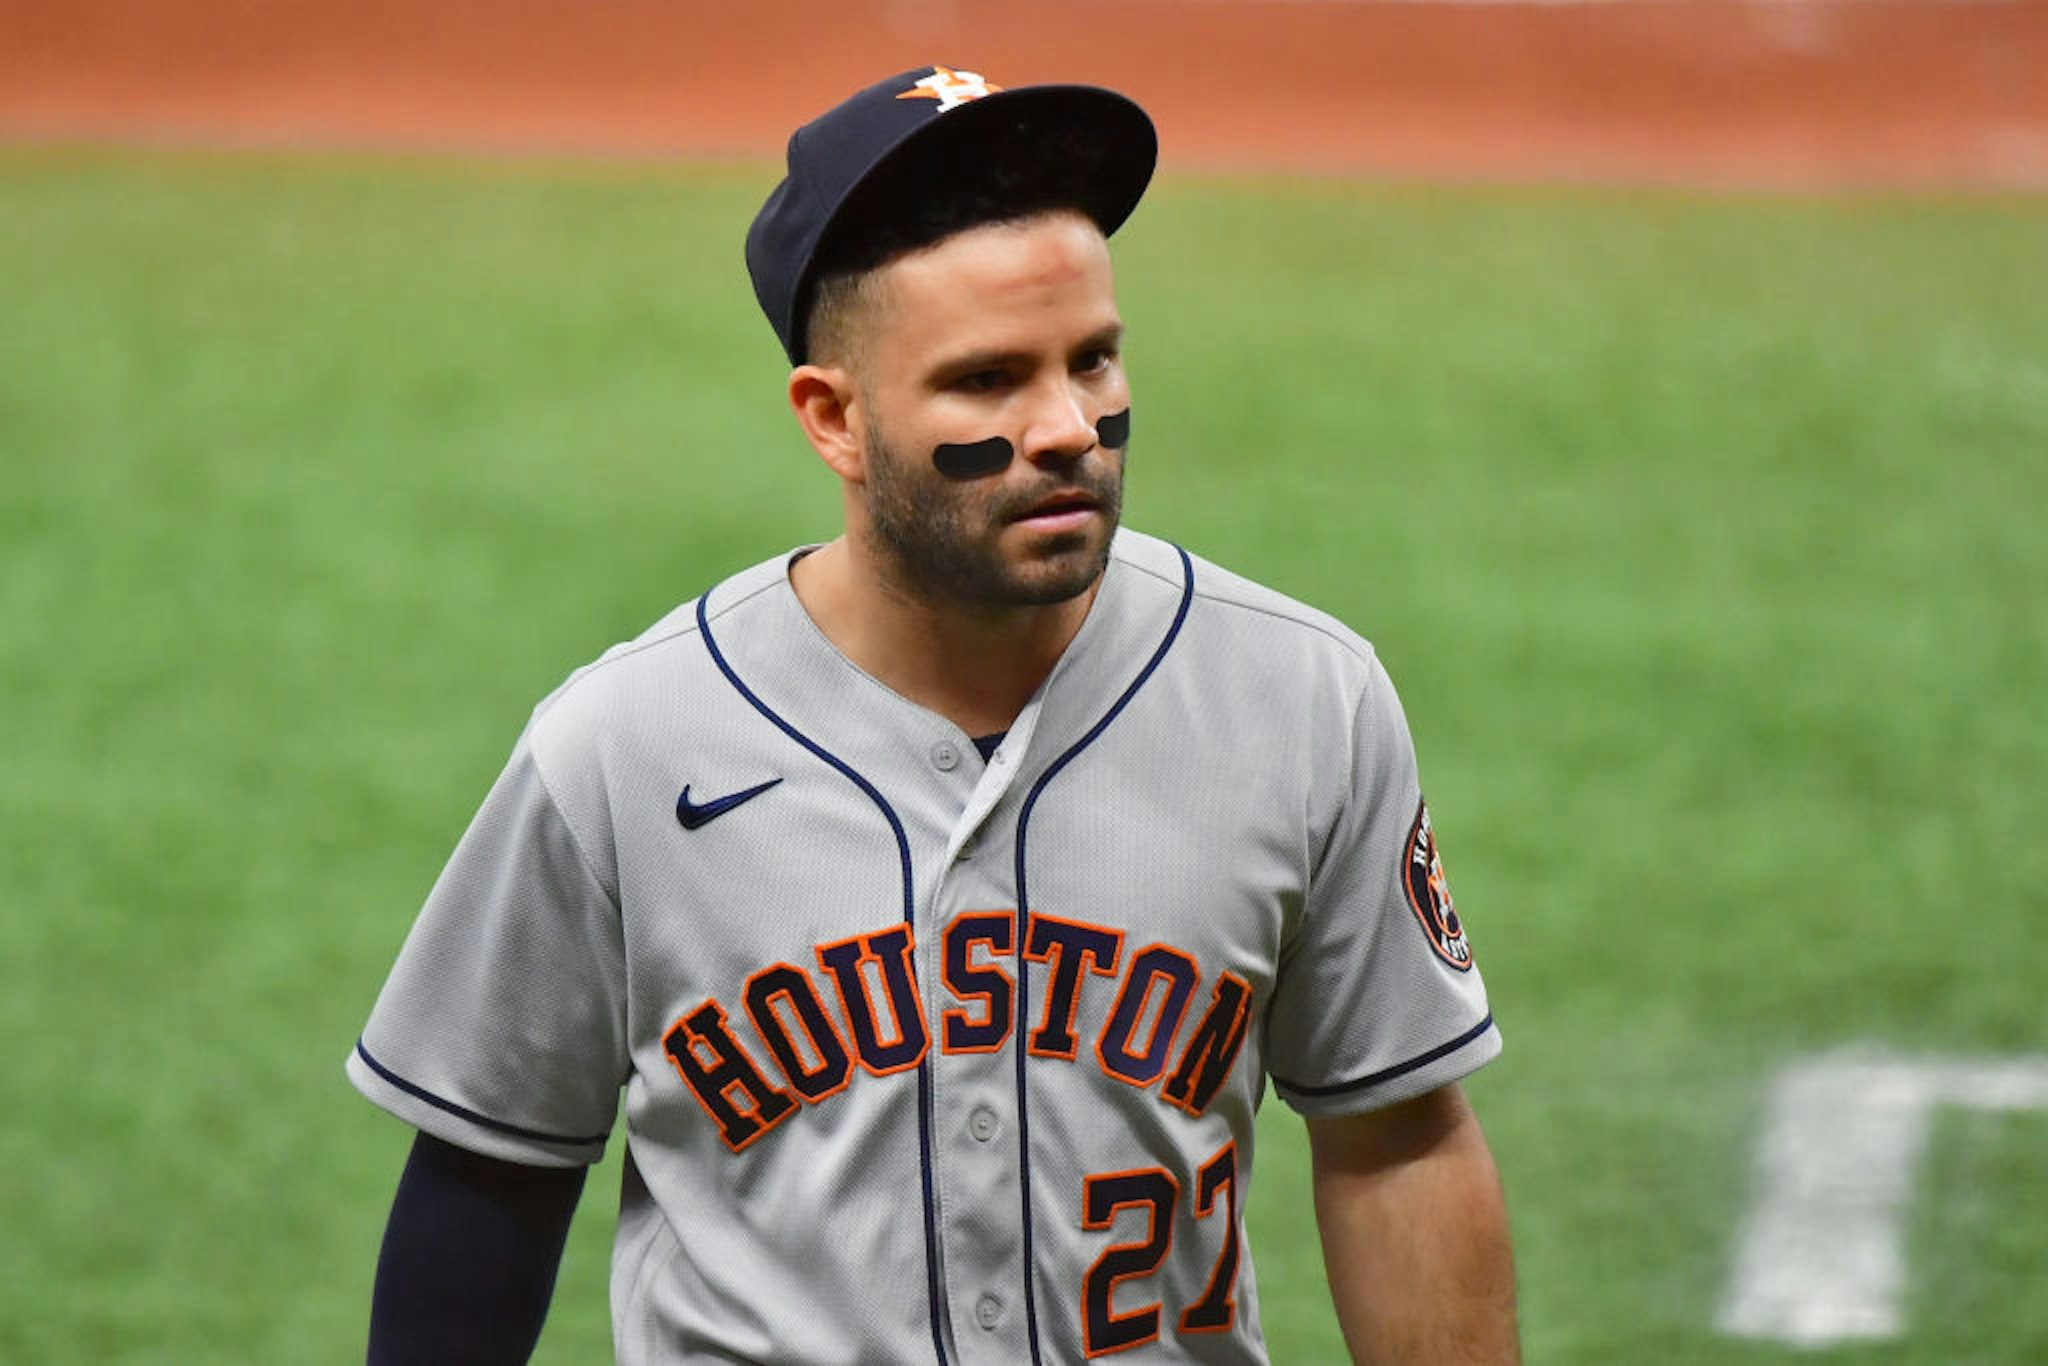 ST PETERSBURG, FLORIDA - MAY 01: Jose Altuve #27 of the Houston Astros walks off the field after the seventh inning against the Tampa Bay Rays at Tropicana Field on May 01, 2021 in St Petersburg, Florida. (Photo by Julio Aguilar/Getty Images)